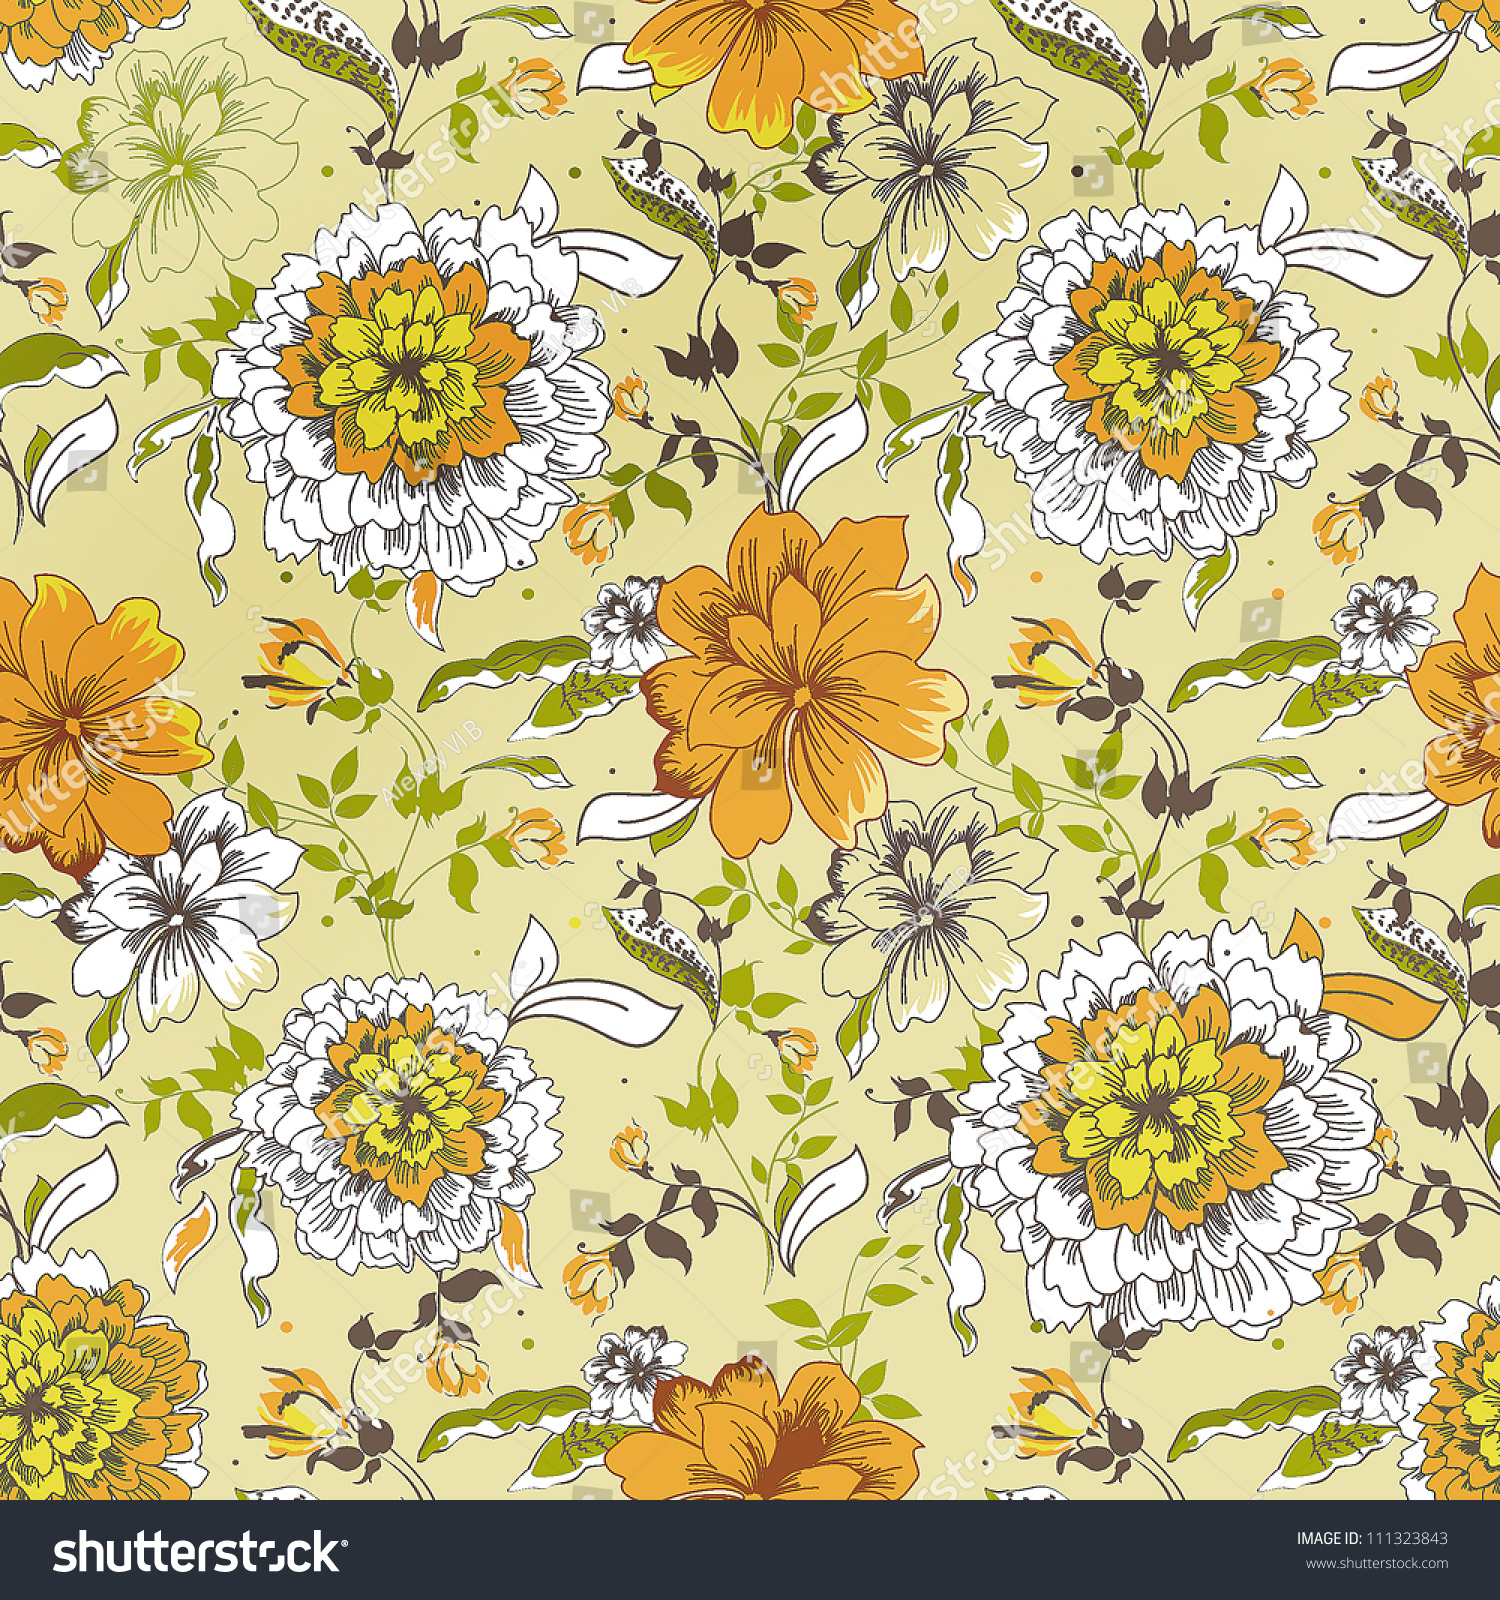 Floral Fabric Vintage Wallpaper, Cute Backdrop. Beautiful Abstract